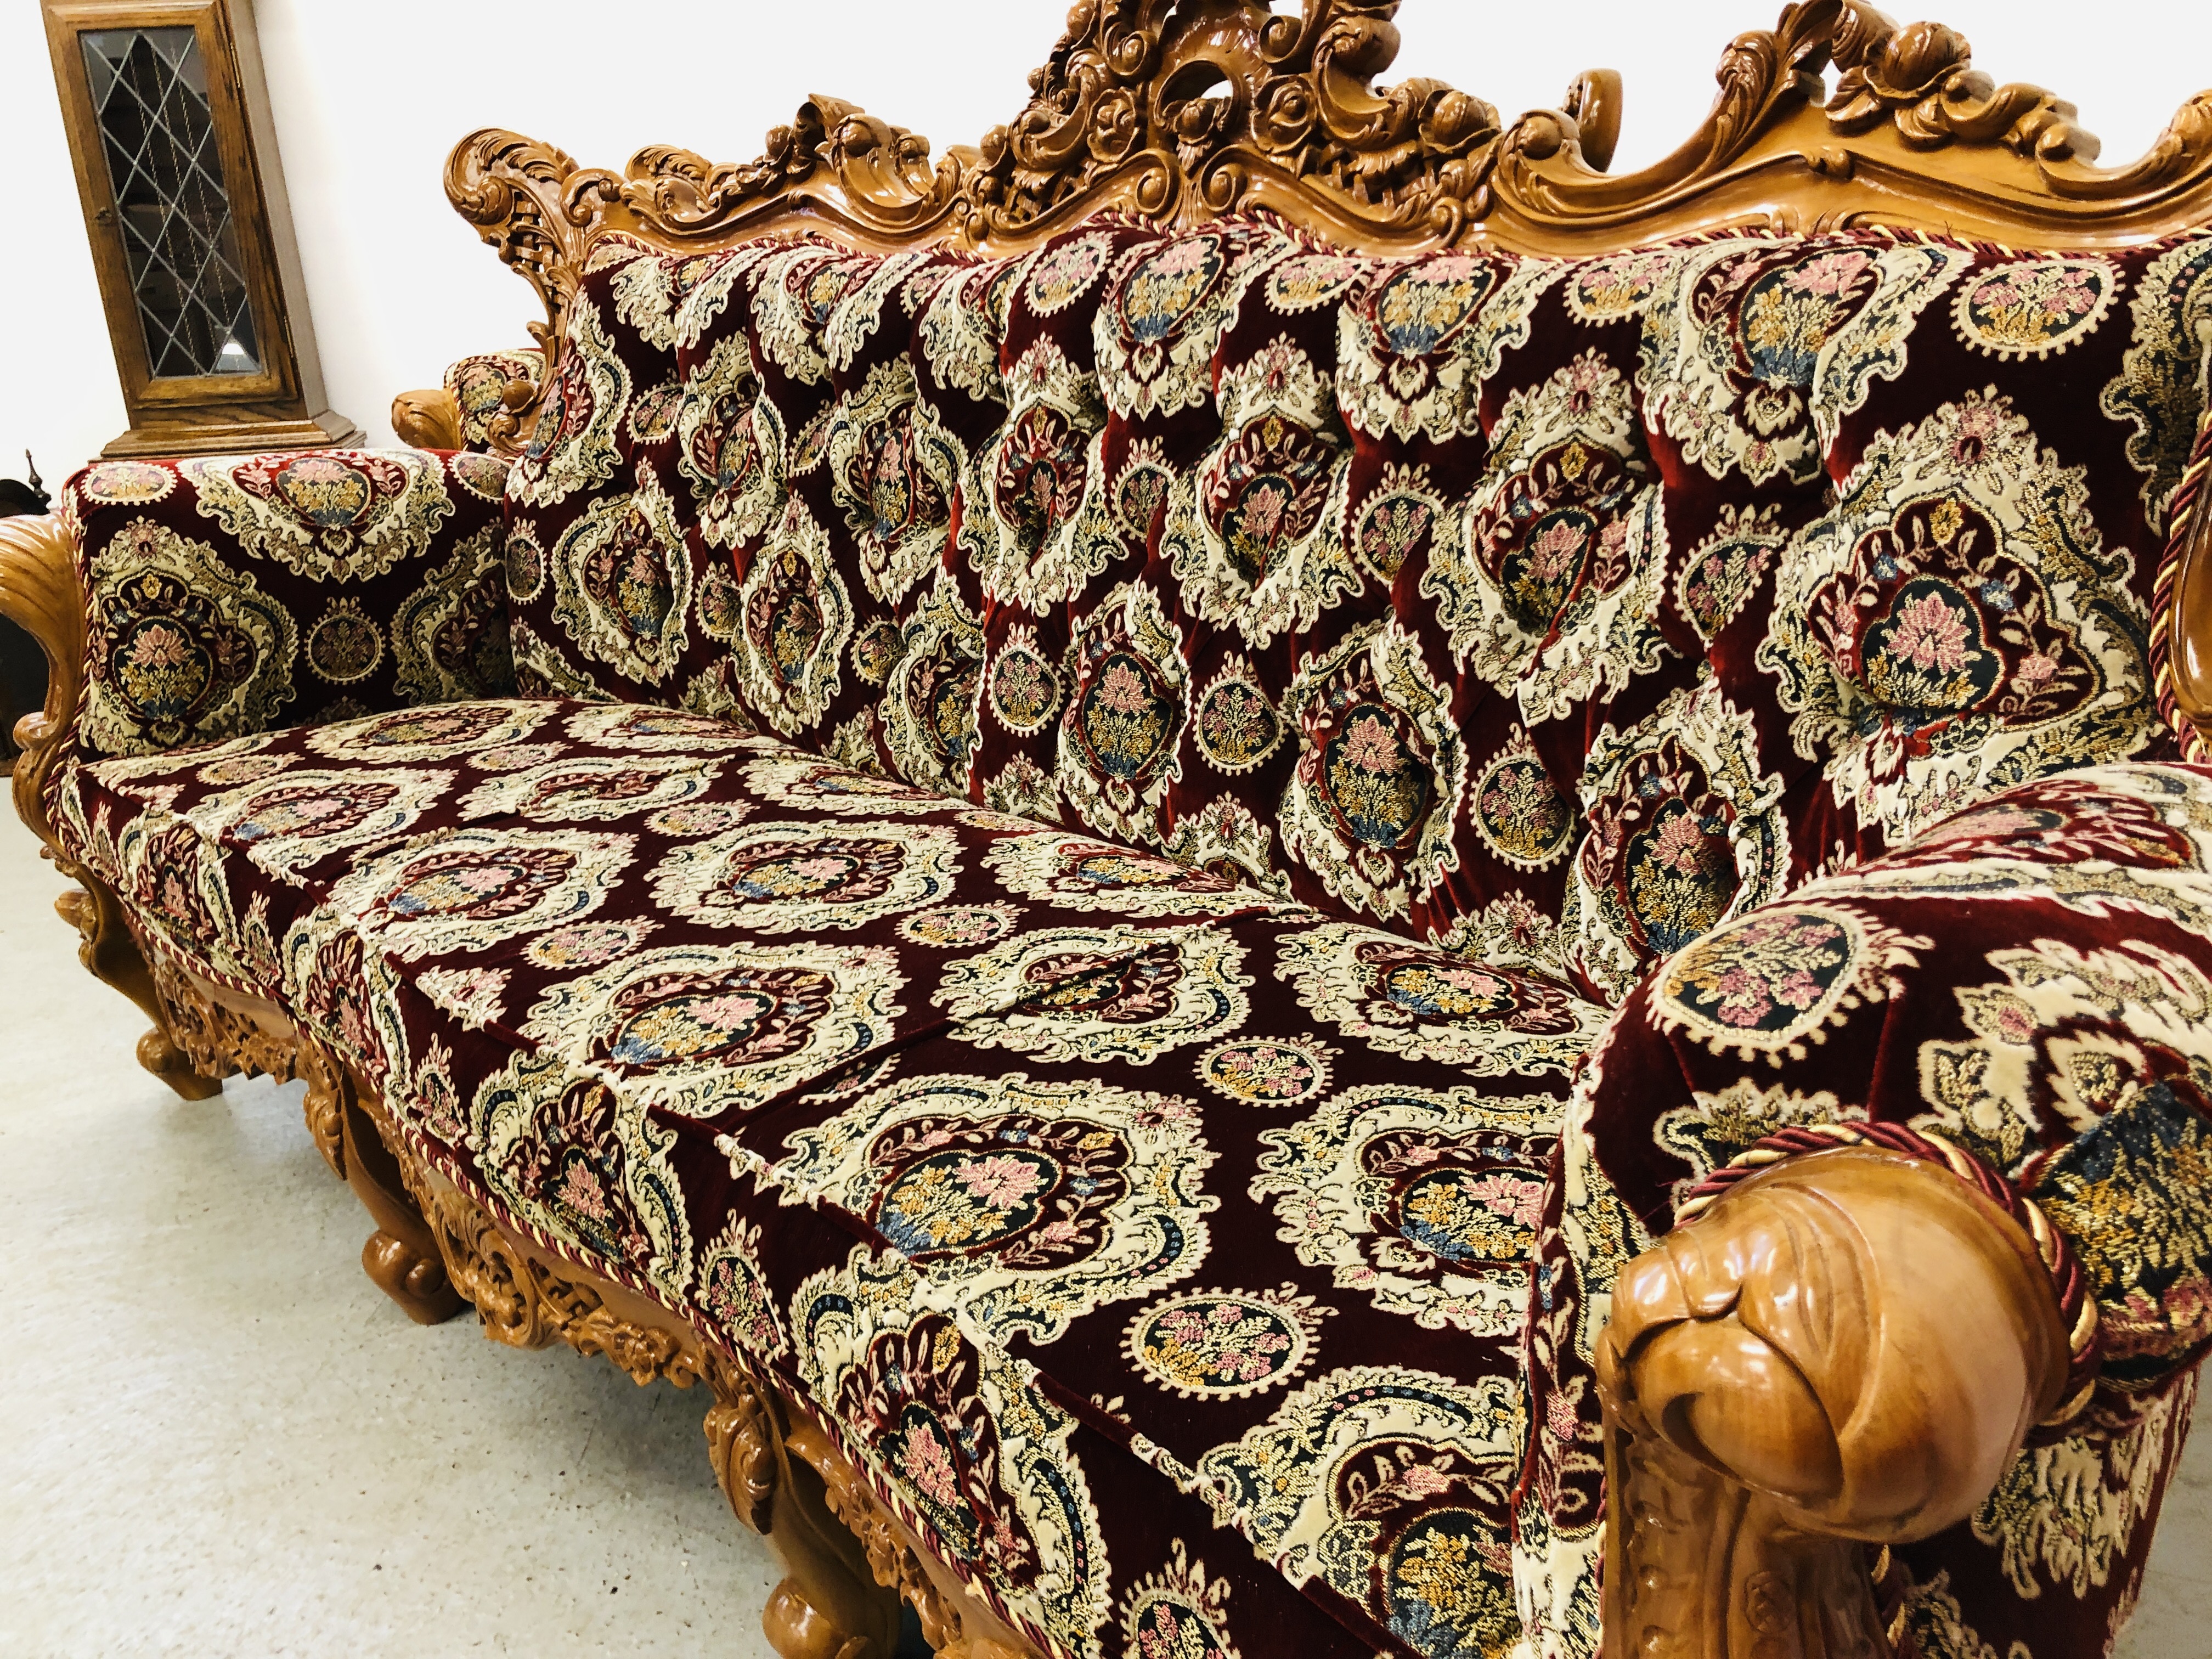 A PAIR OF HIGHLY DECORATIVE REPRODUCTION CONTINENTAL STYLE THREE SEATER COUCHES - NON COMPLIANT - Image 4 of 14